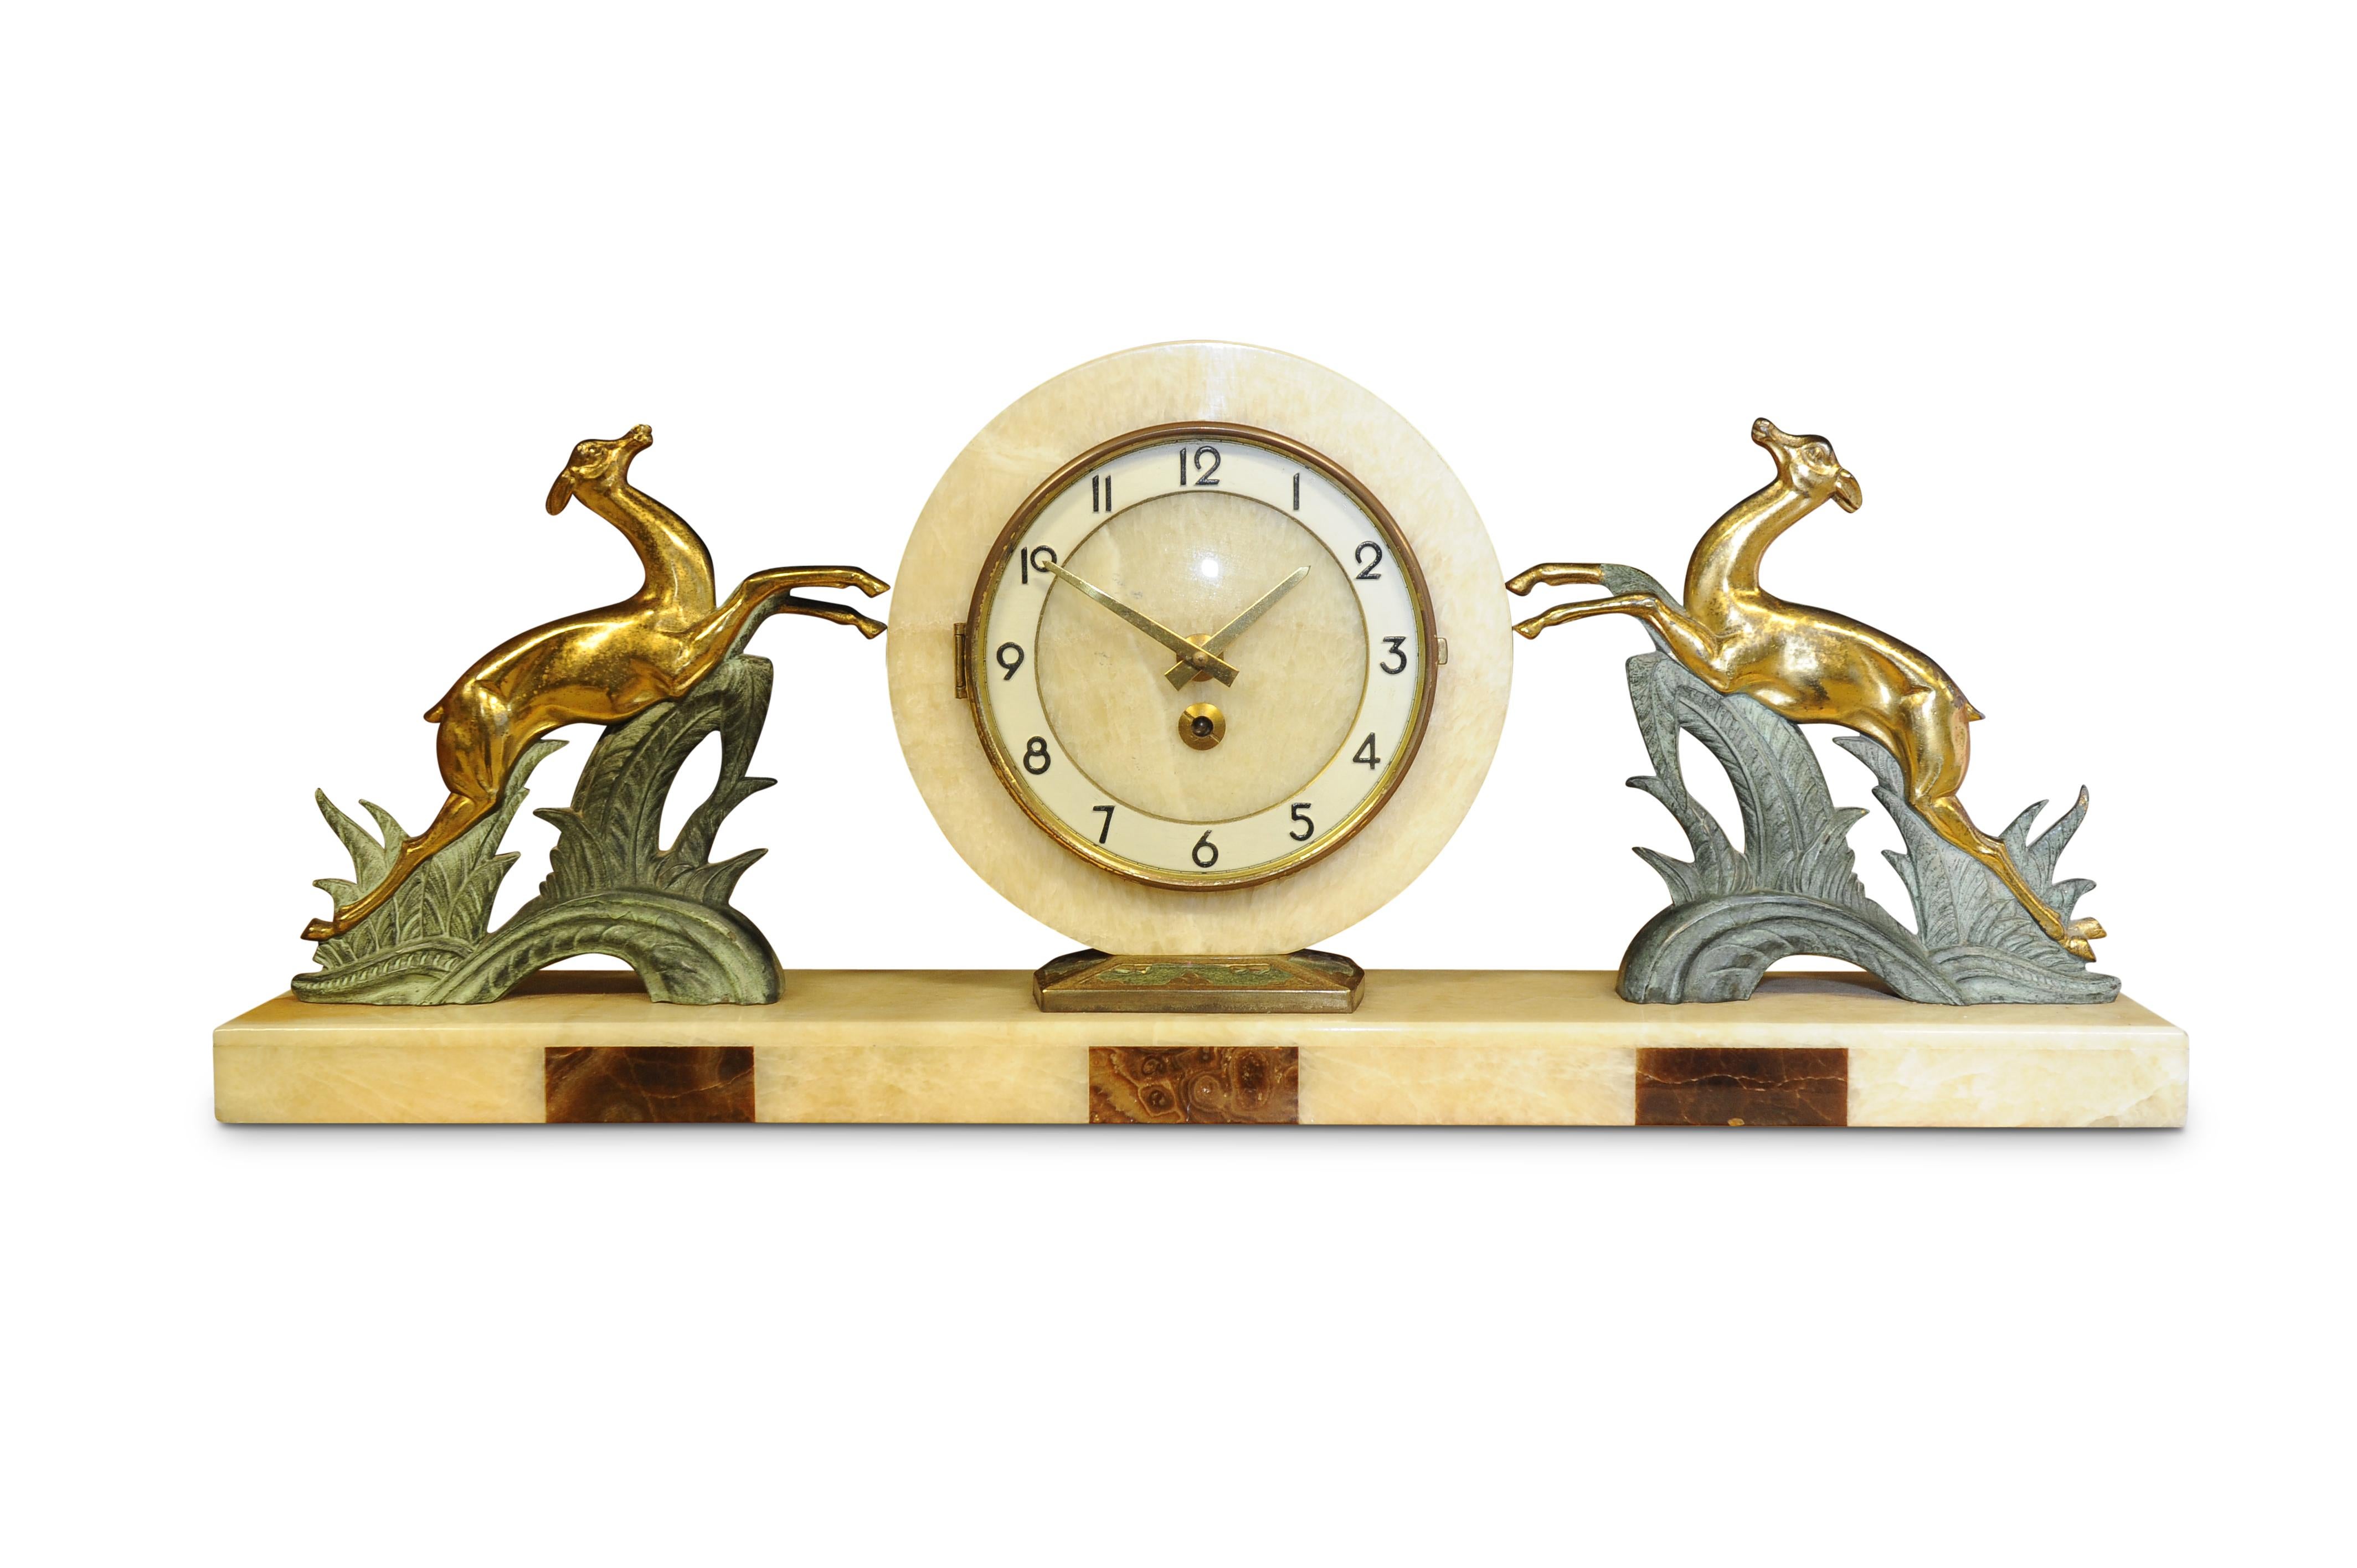 Bayard Art Deco onyx, marble and spelter mantel (fireplace) clock with gilt leaping deer

Albert Villon established his clock making shop in 1867 in St Nicholas D'Aliermont in Northern France, he specialized in marine clocks and travel/carriage